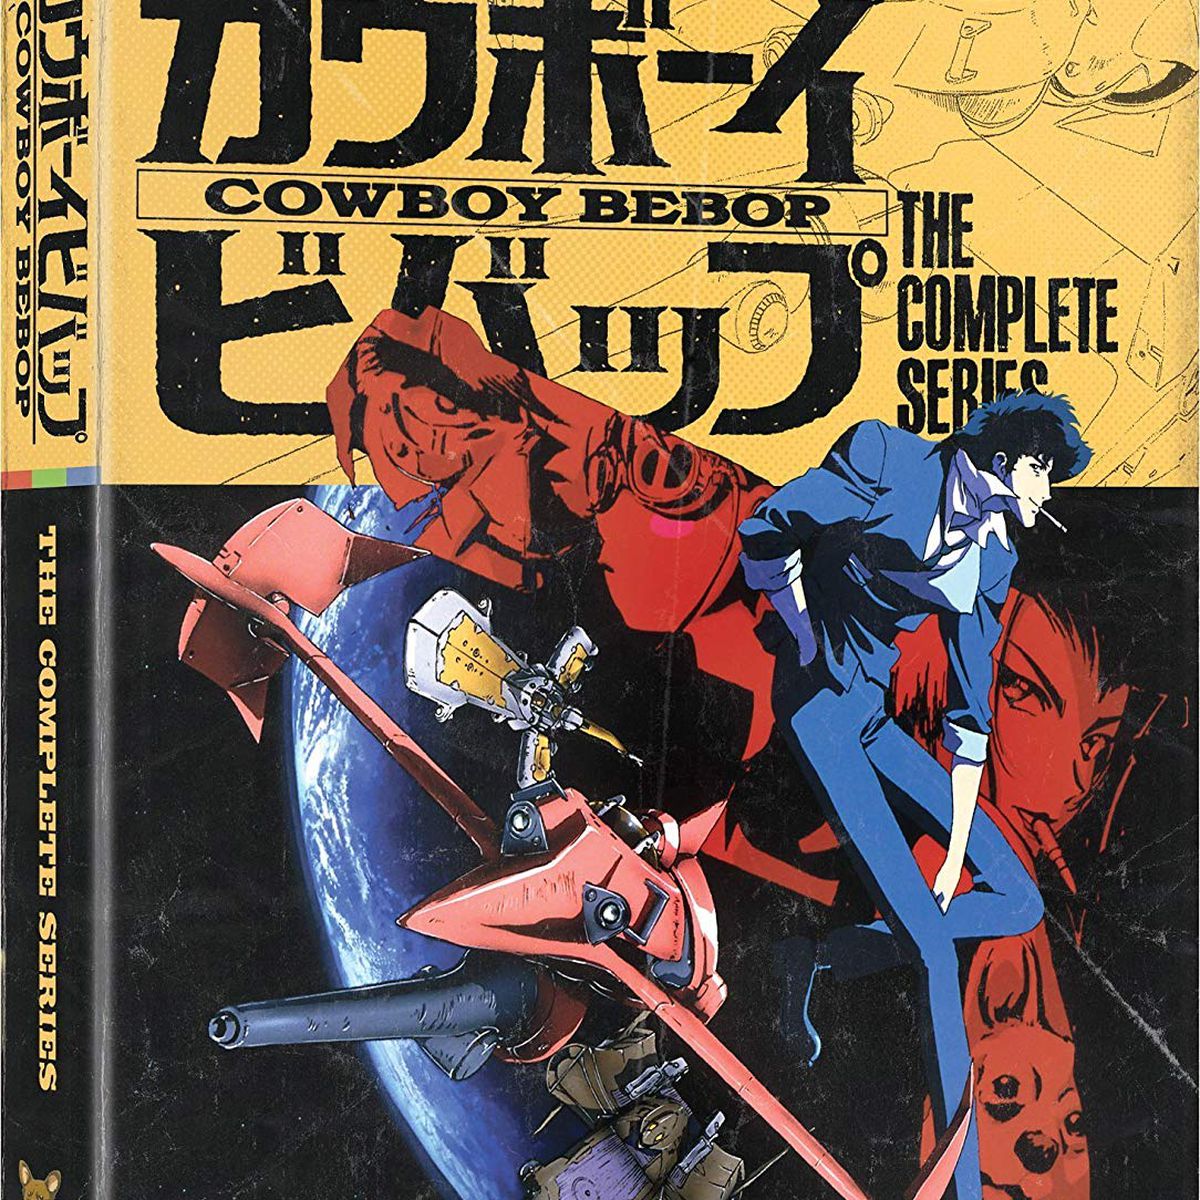 Cover art for Cowboy Bebop: The Complete Series